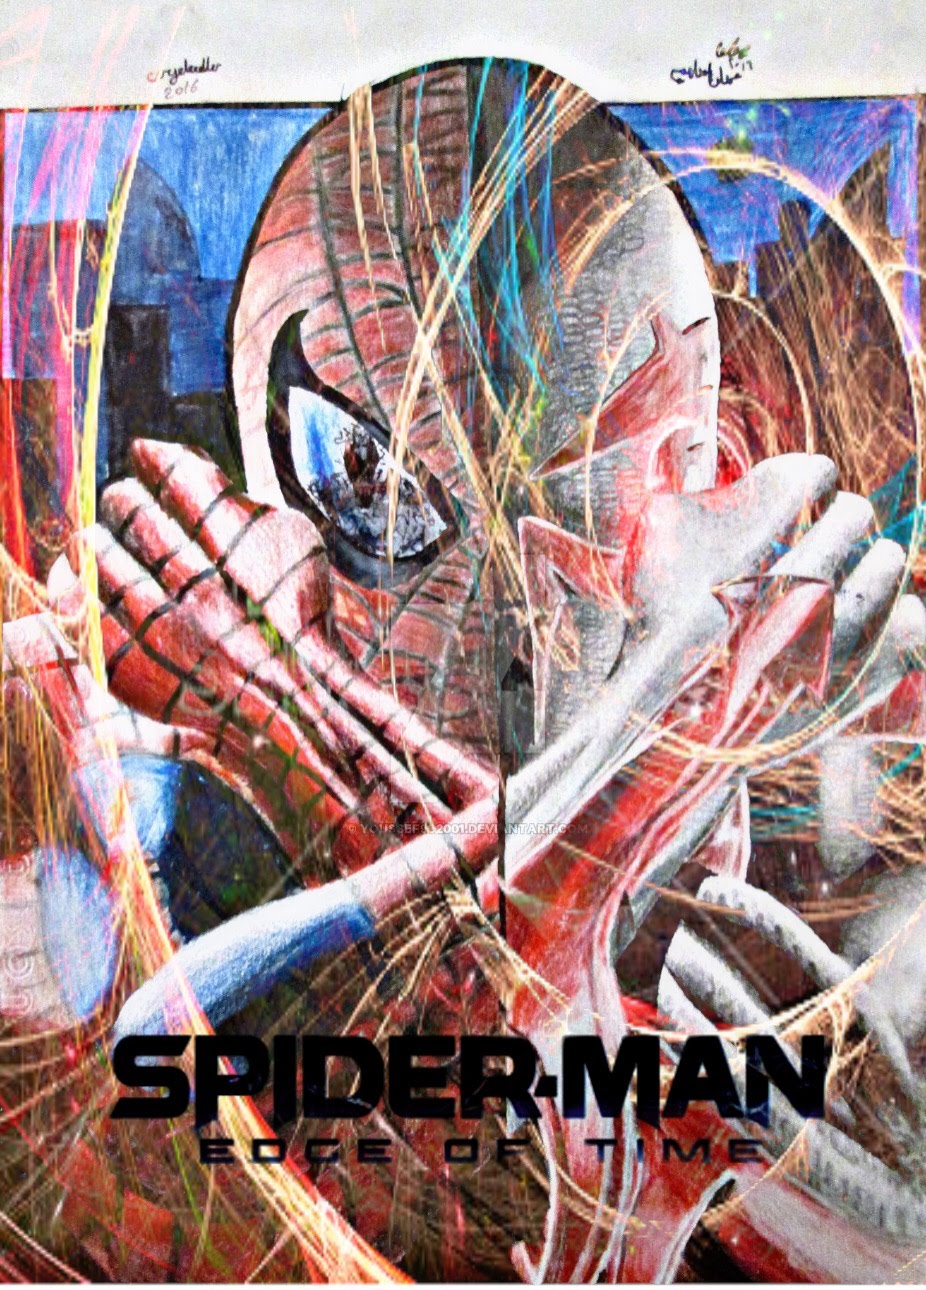 Spider-Man: Edge of Time - Wikipedia